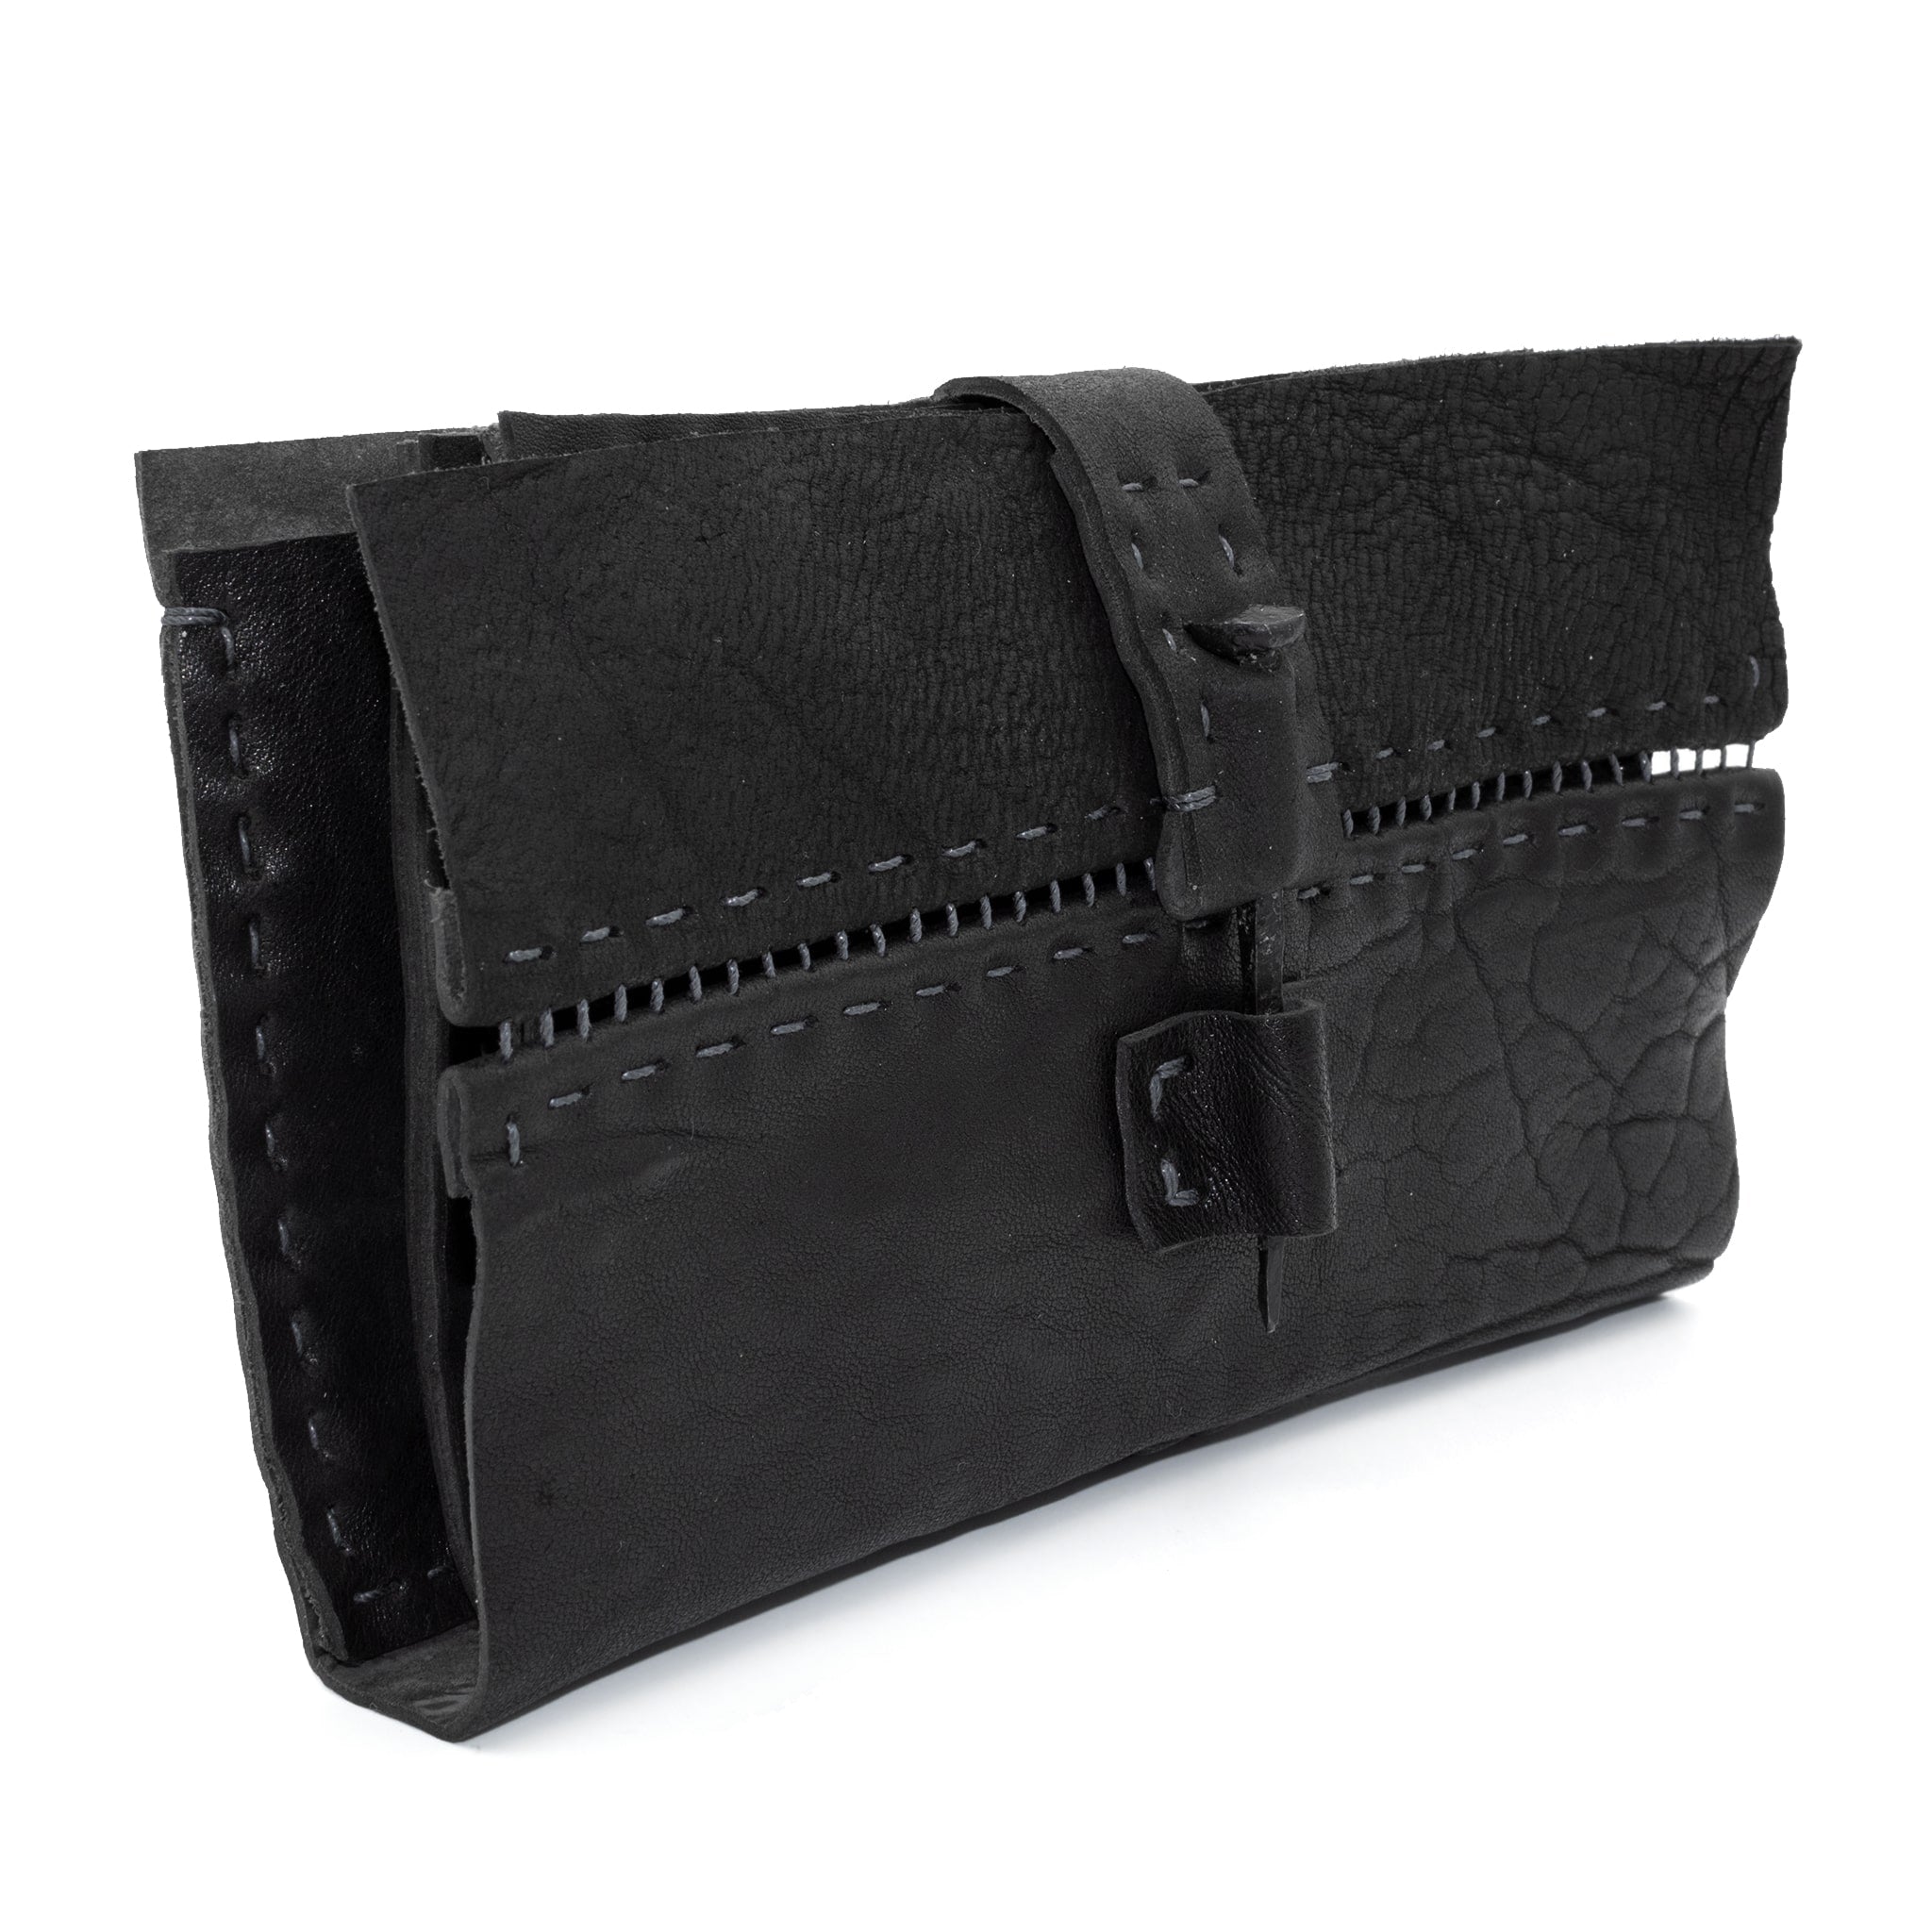 avant garde hand sewn horse leather bags, belts, wallets and accessories | atelier skn